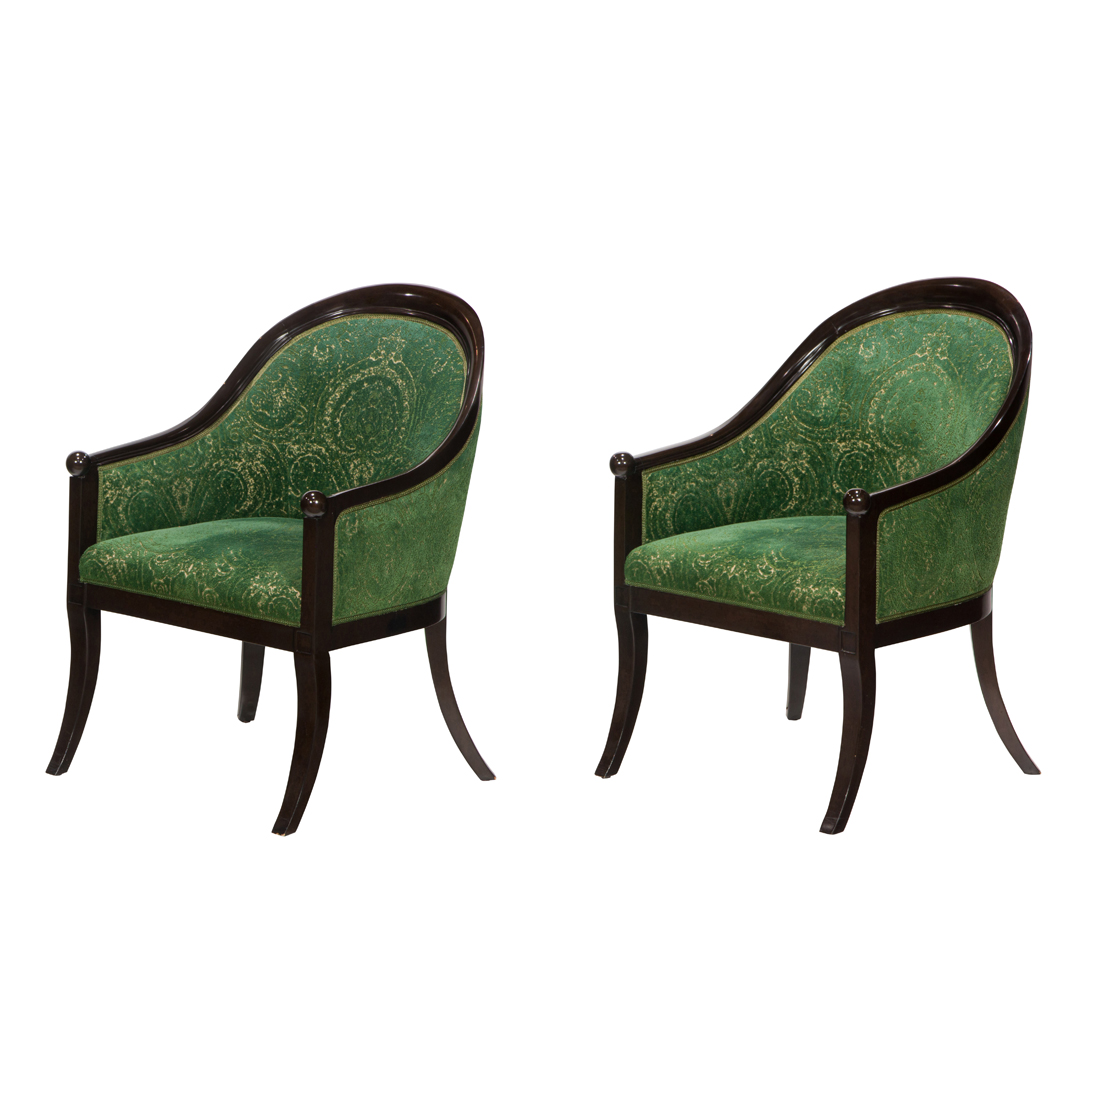 ROSE TARLOW, MONTPELIER CHAIRS,